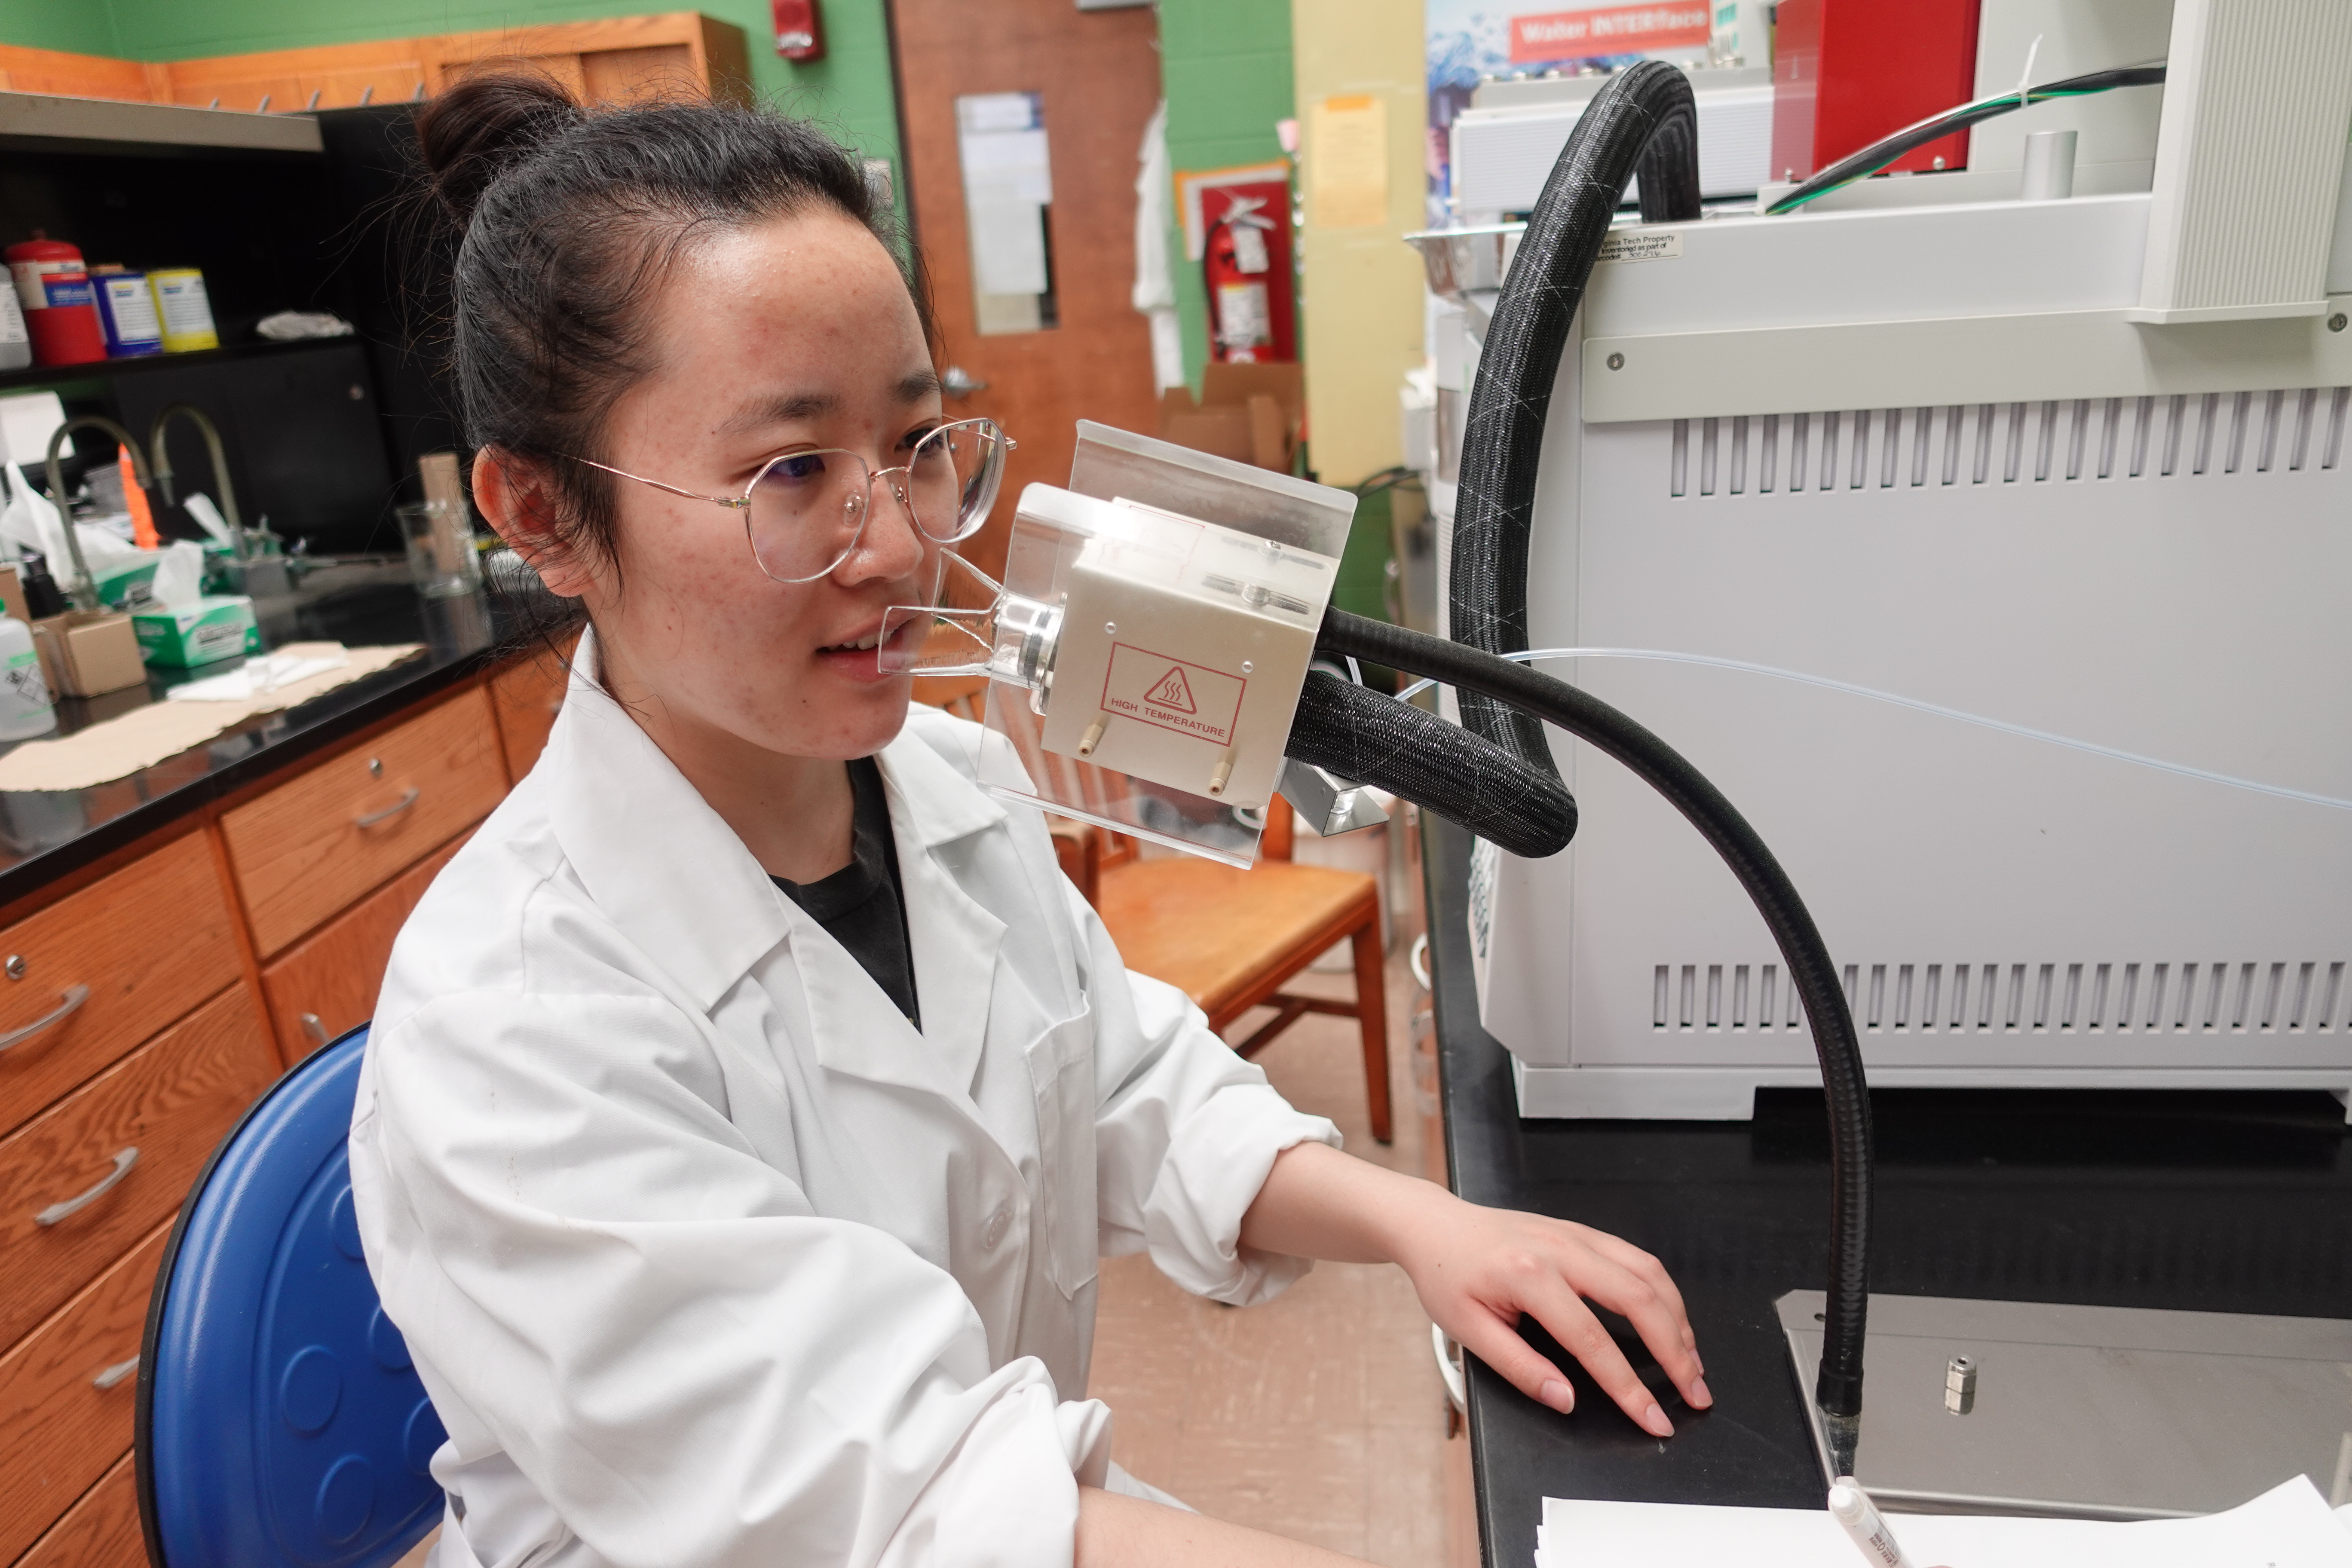 This photo shows a young Asian woman with her hair up in a bun and wearing a white lab coat. She is in a laboratory and has her fae close to a device that allows her to sniff and smell samples.. 